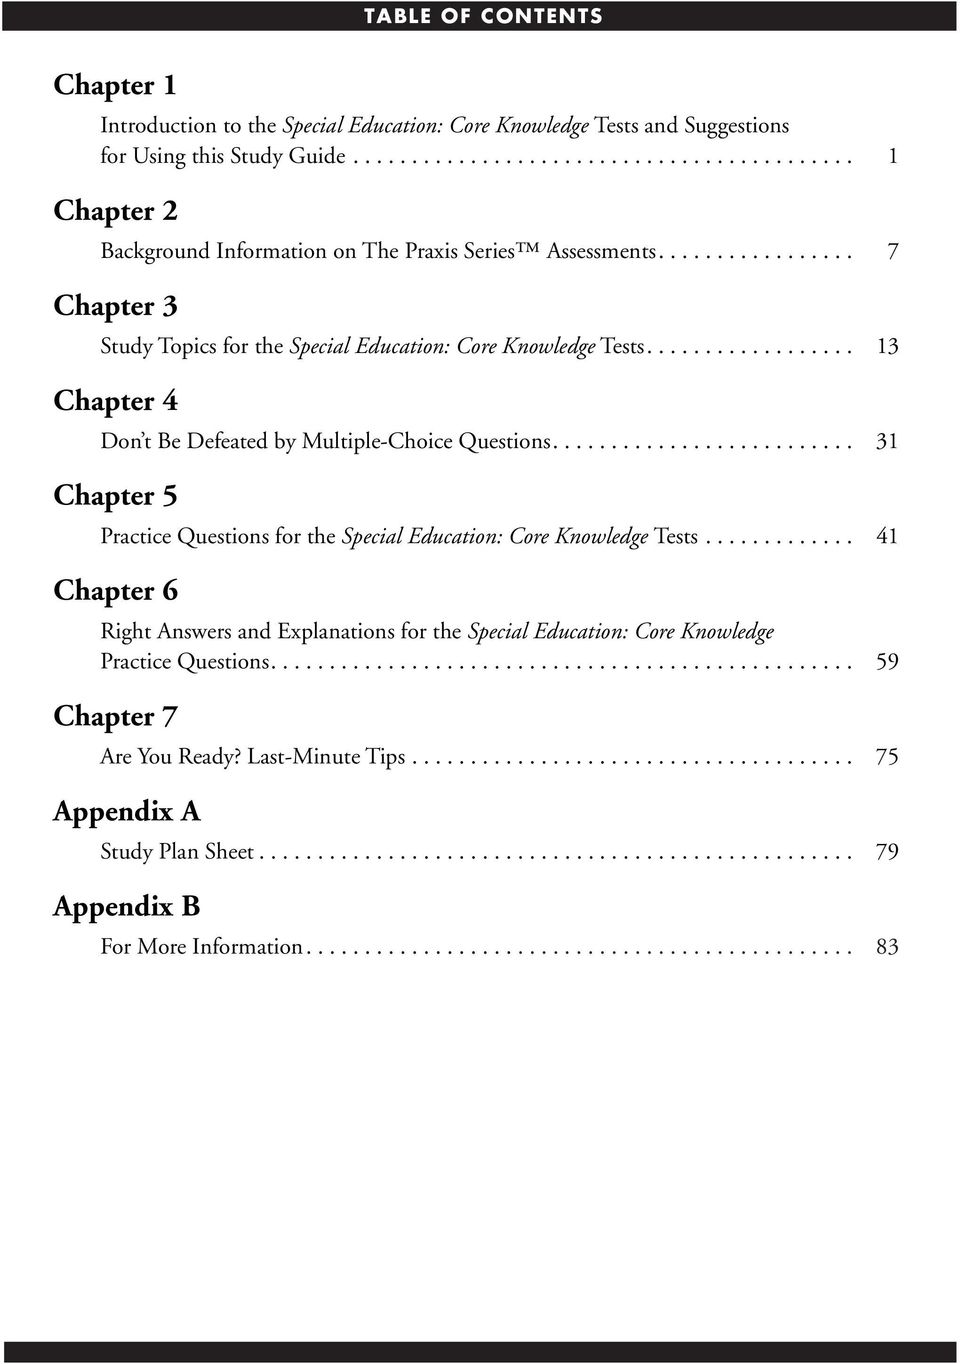 ......................... 31 Chapter 5 Practice Questions for the Special Education: Core Knowledge Tests.